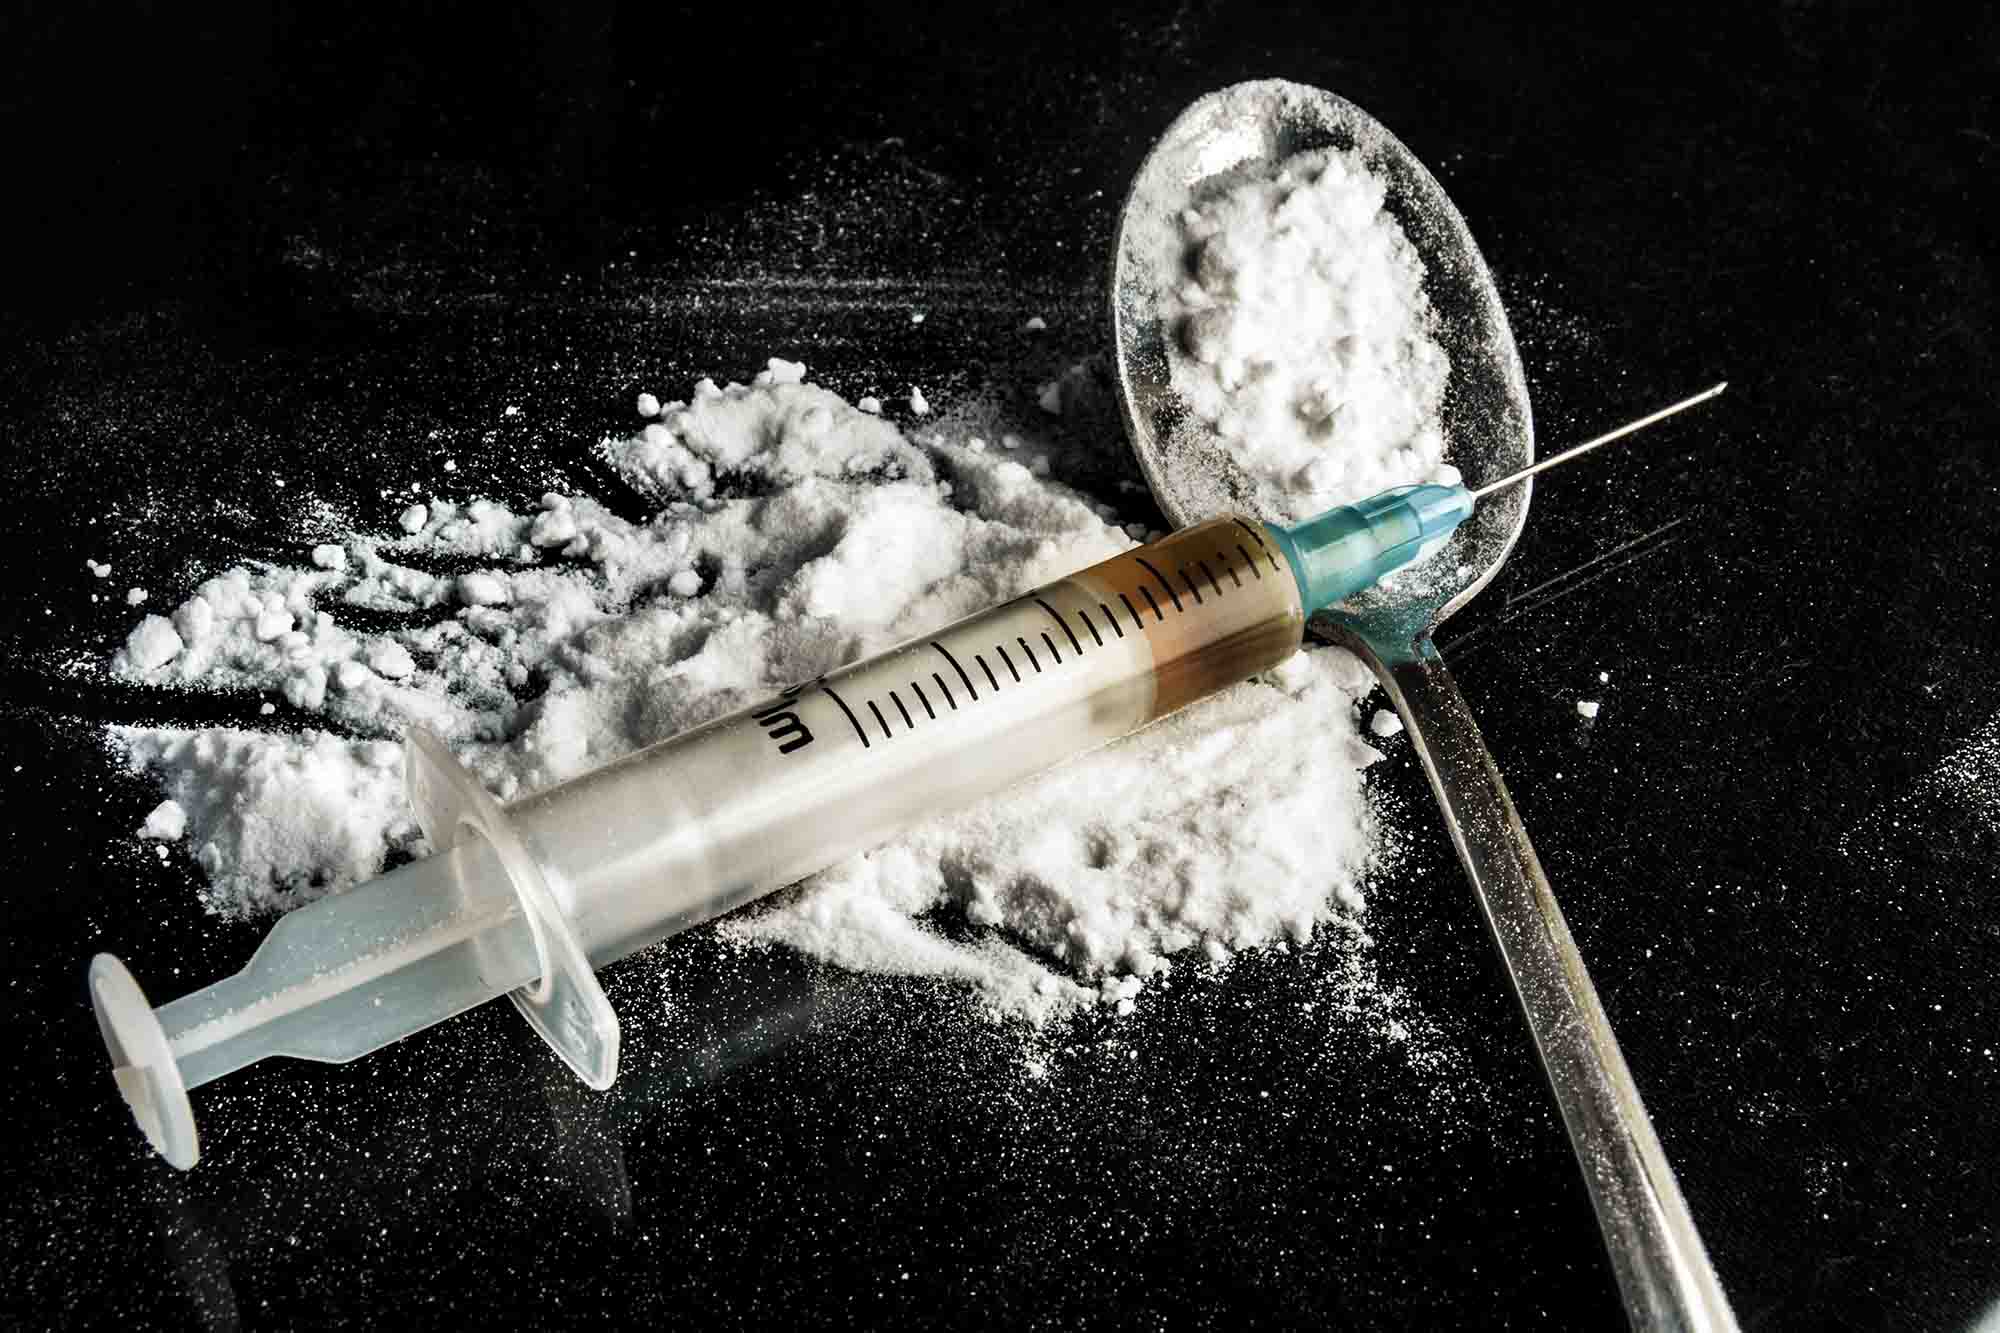 What should you know about heroin addiction?